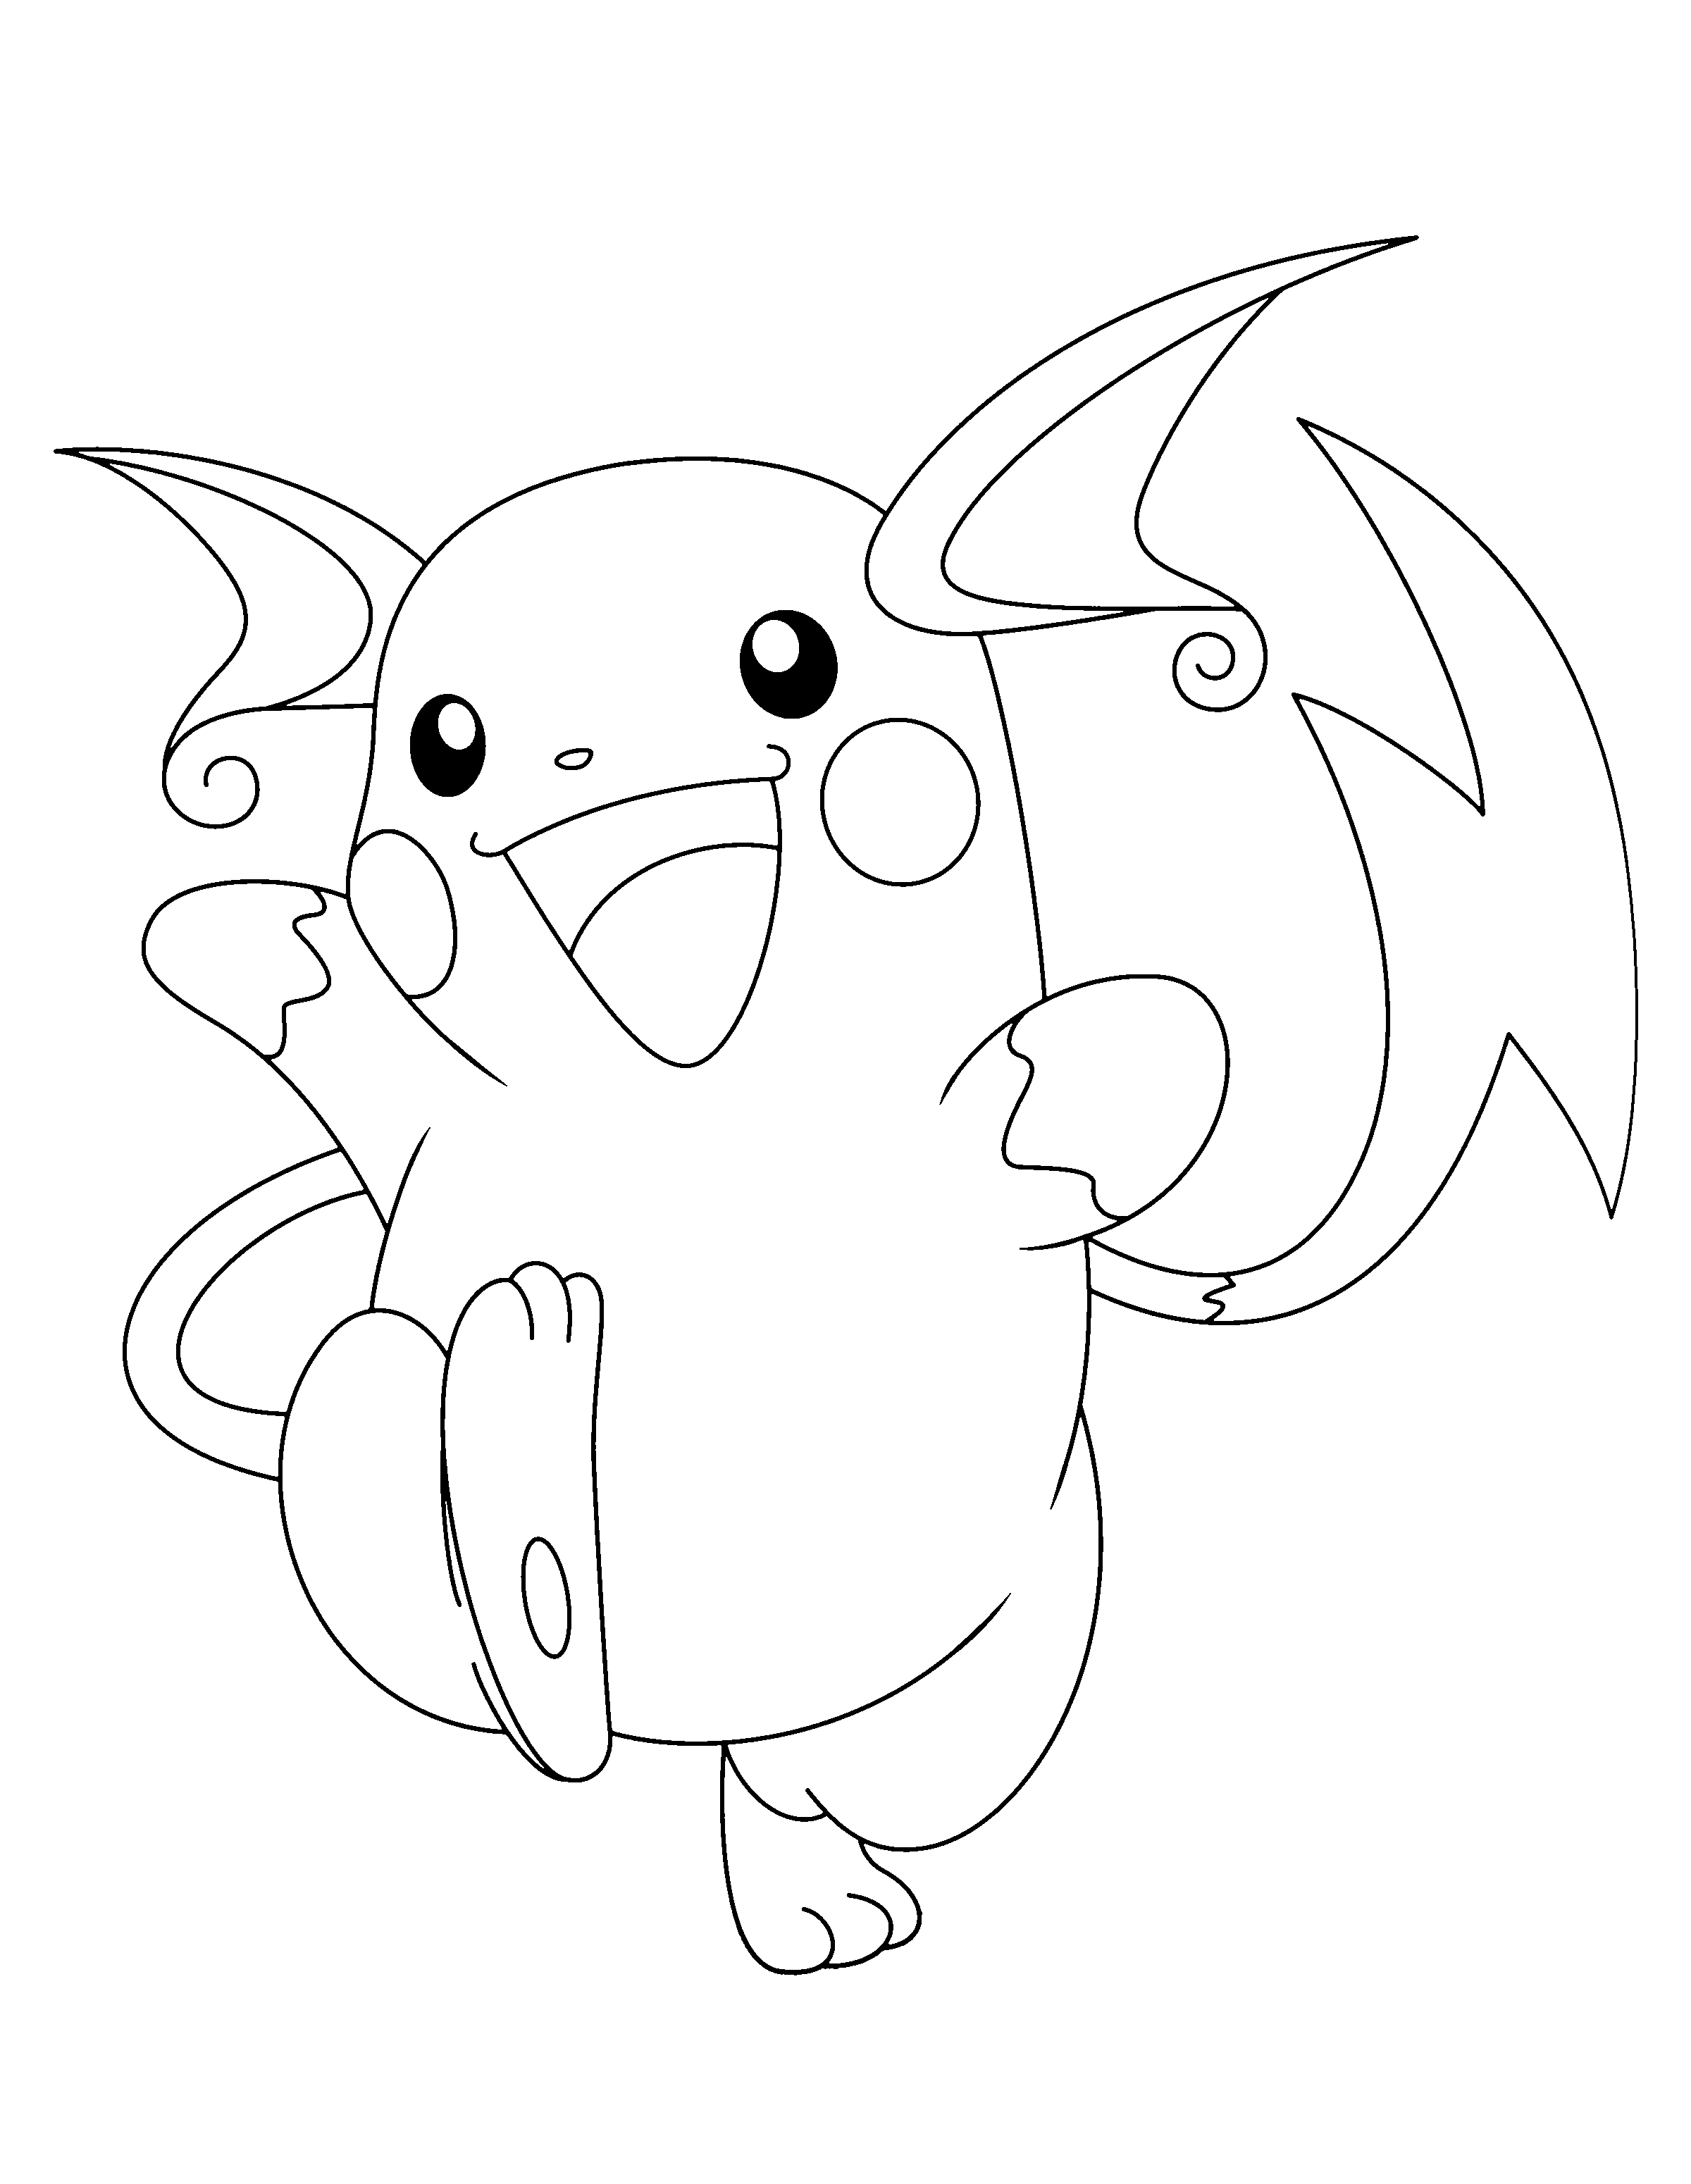 Pikachu Pokemon Go Coloring Pages These Pokemon Coloring Pages To